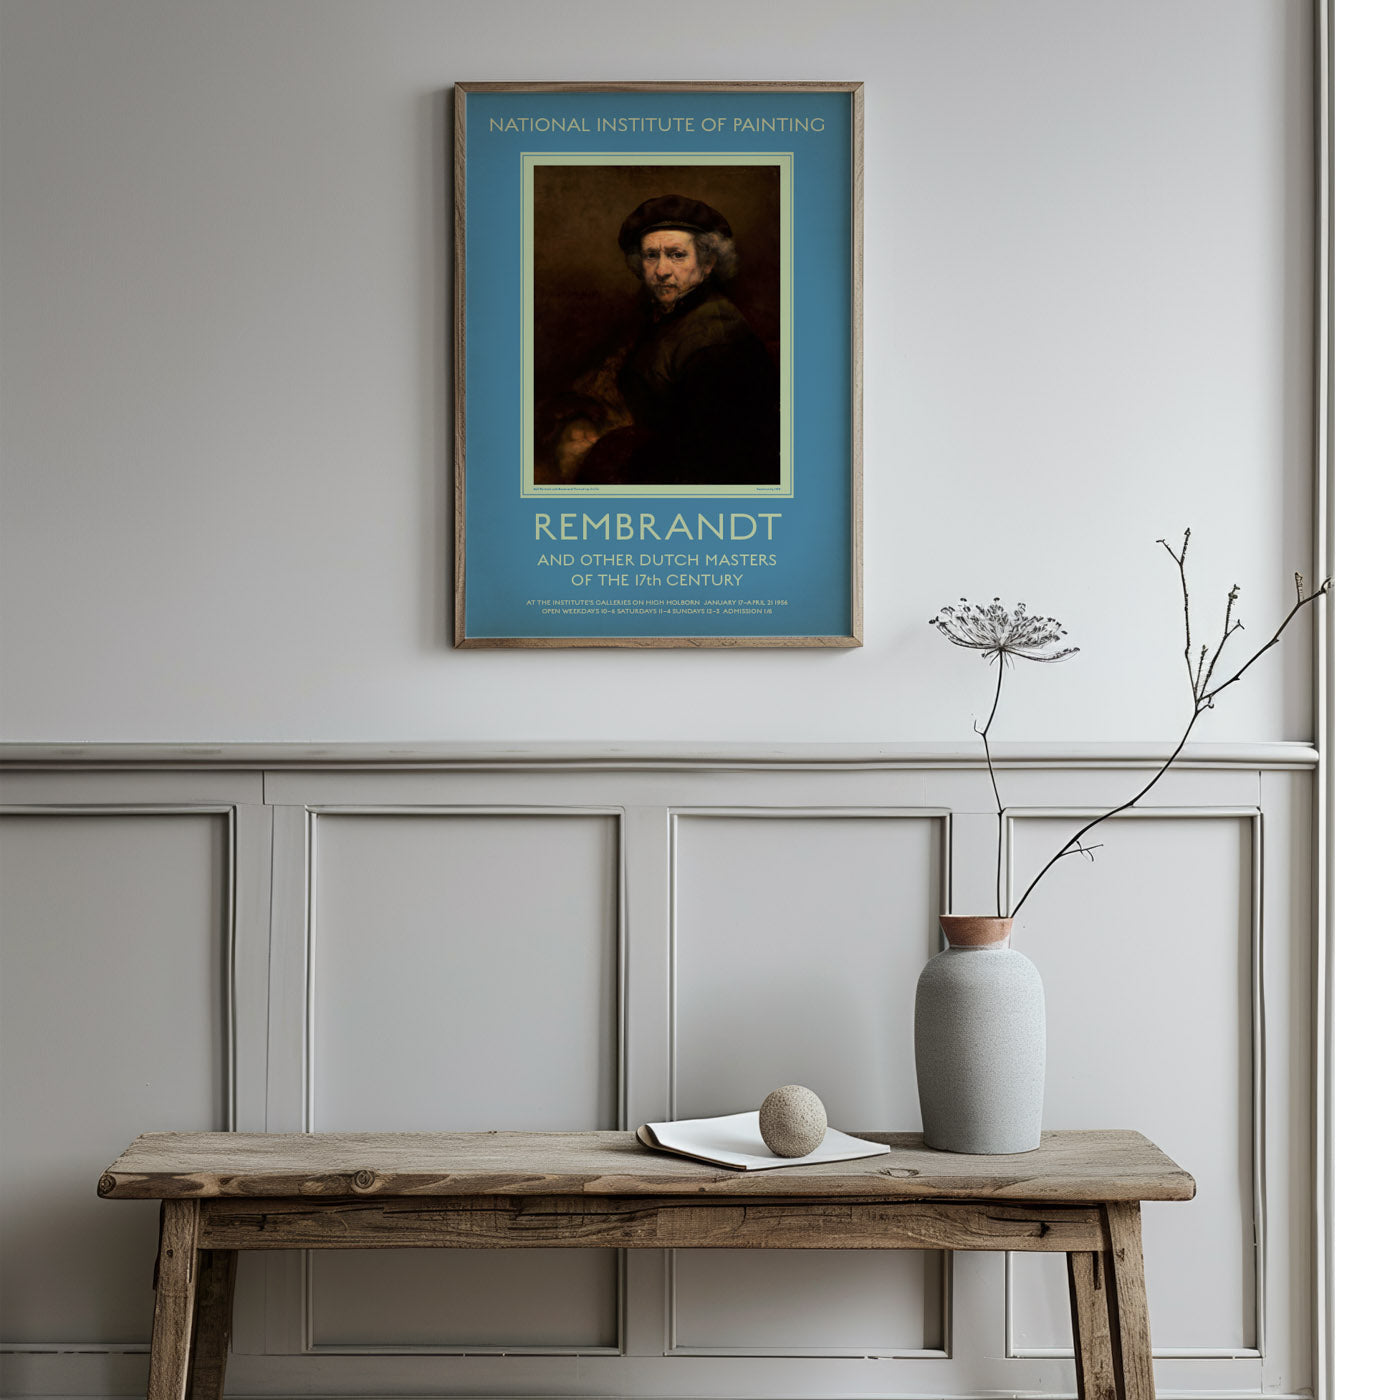 Collectable Rembrandt poster in a restrained 1950s British design, for educational art decor.